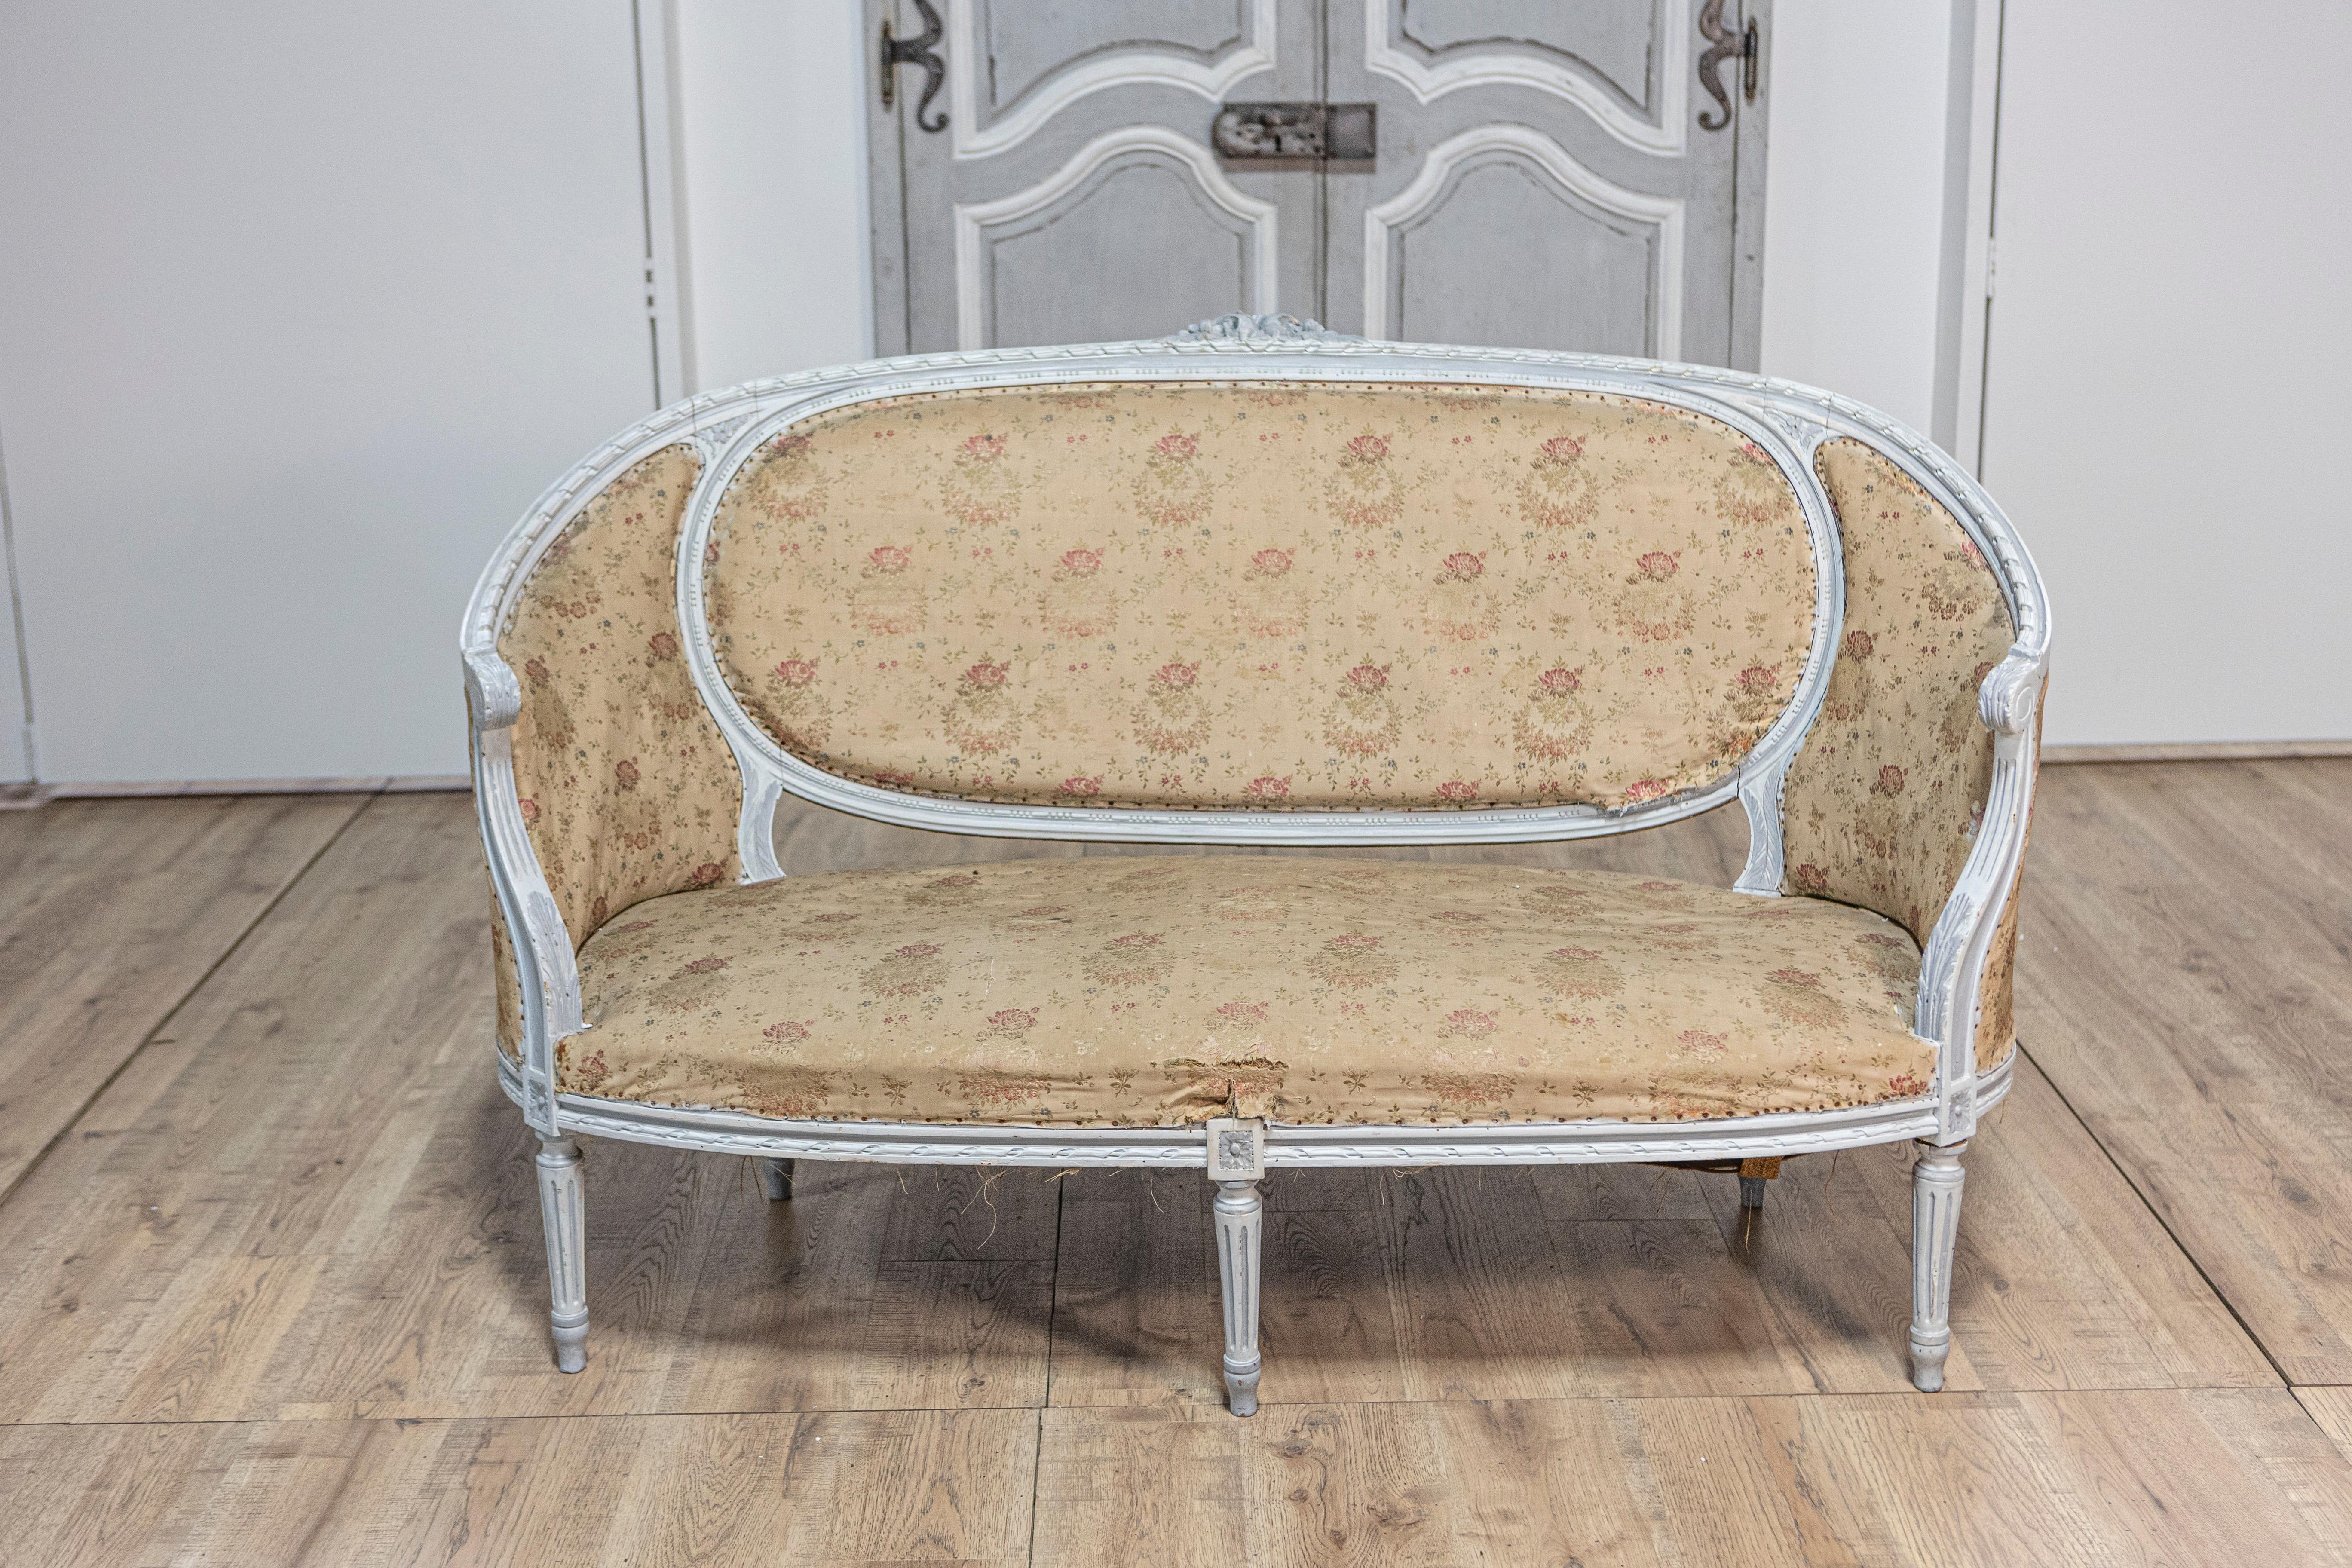 A French Louis XVI style sofa from circa 1900 with soft light blue painted finish, carved floral motif on the crest, scrolling arms and fluted legs. This French Louis XVI style sofa, known as a Canapé corbeille, hails from circa 1900 and boasts a